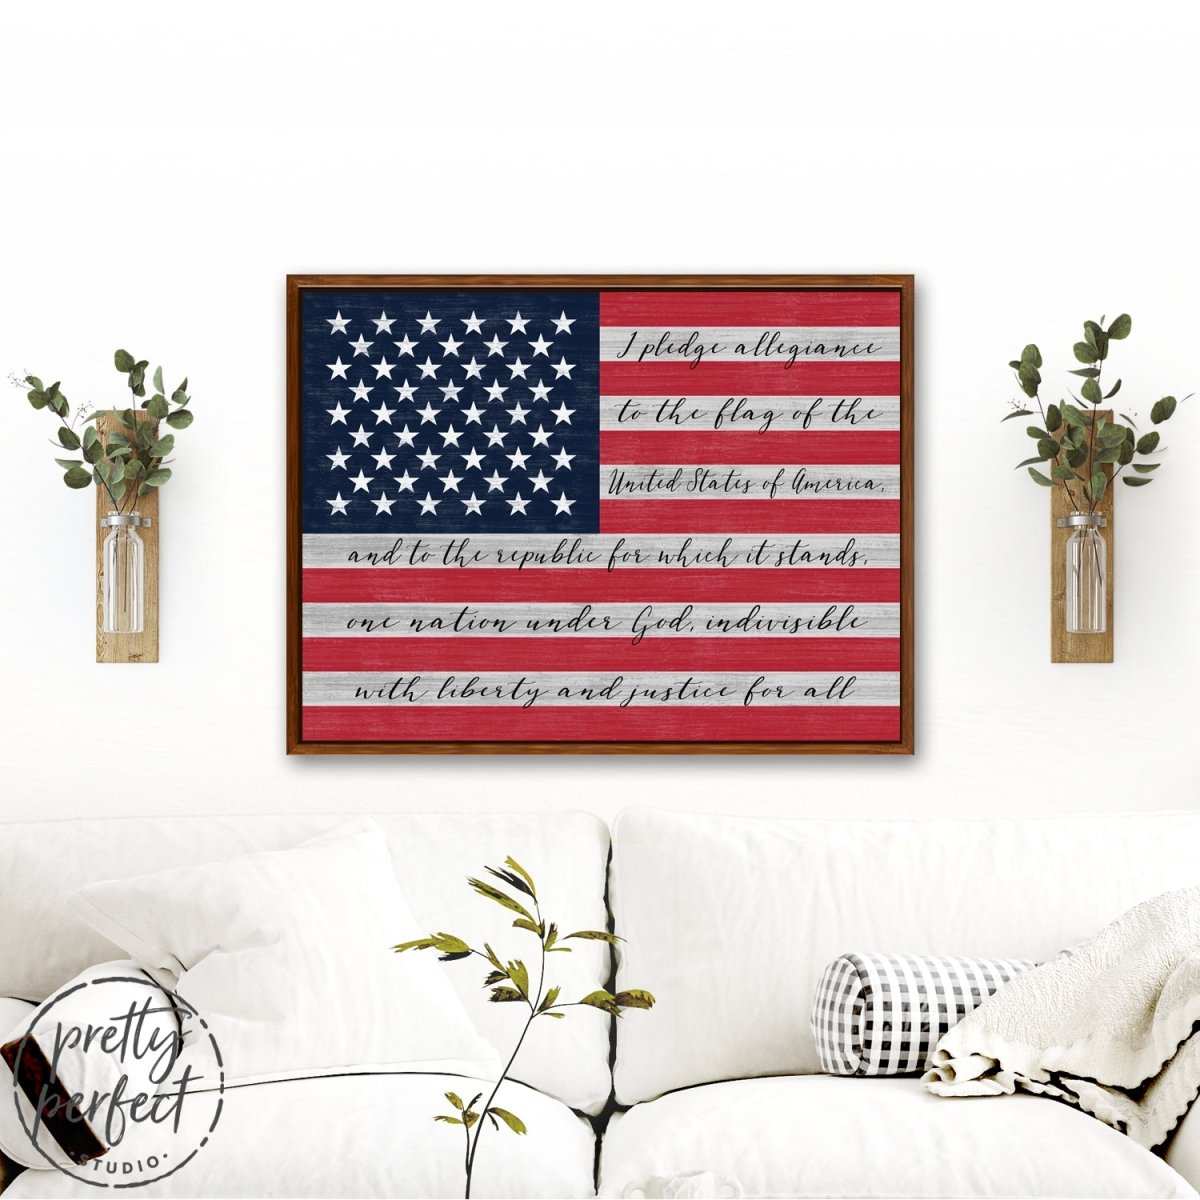 American Flag with Pledge of Allegiance Sign Above Couch - Pretty Perfect Studio